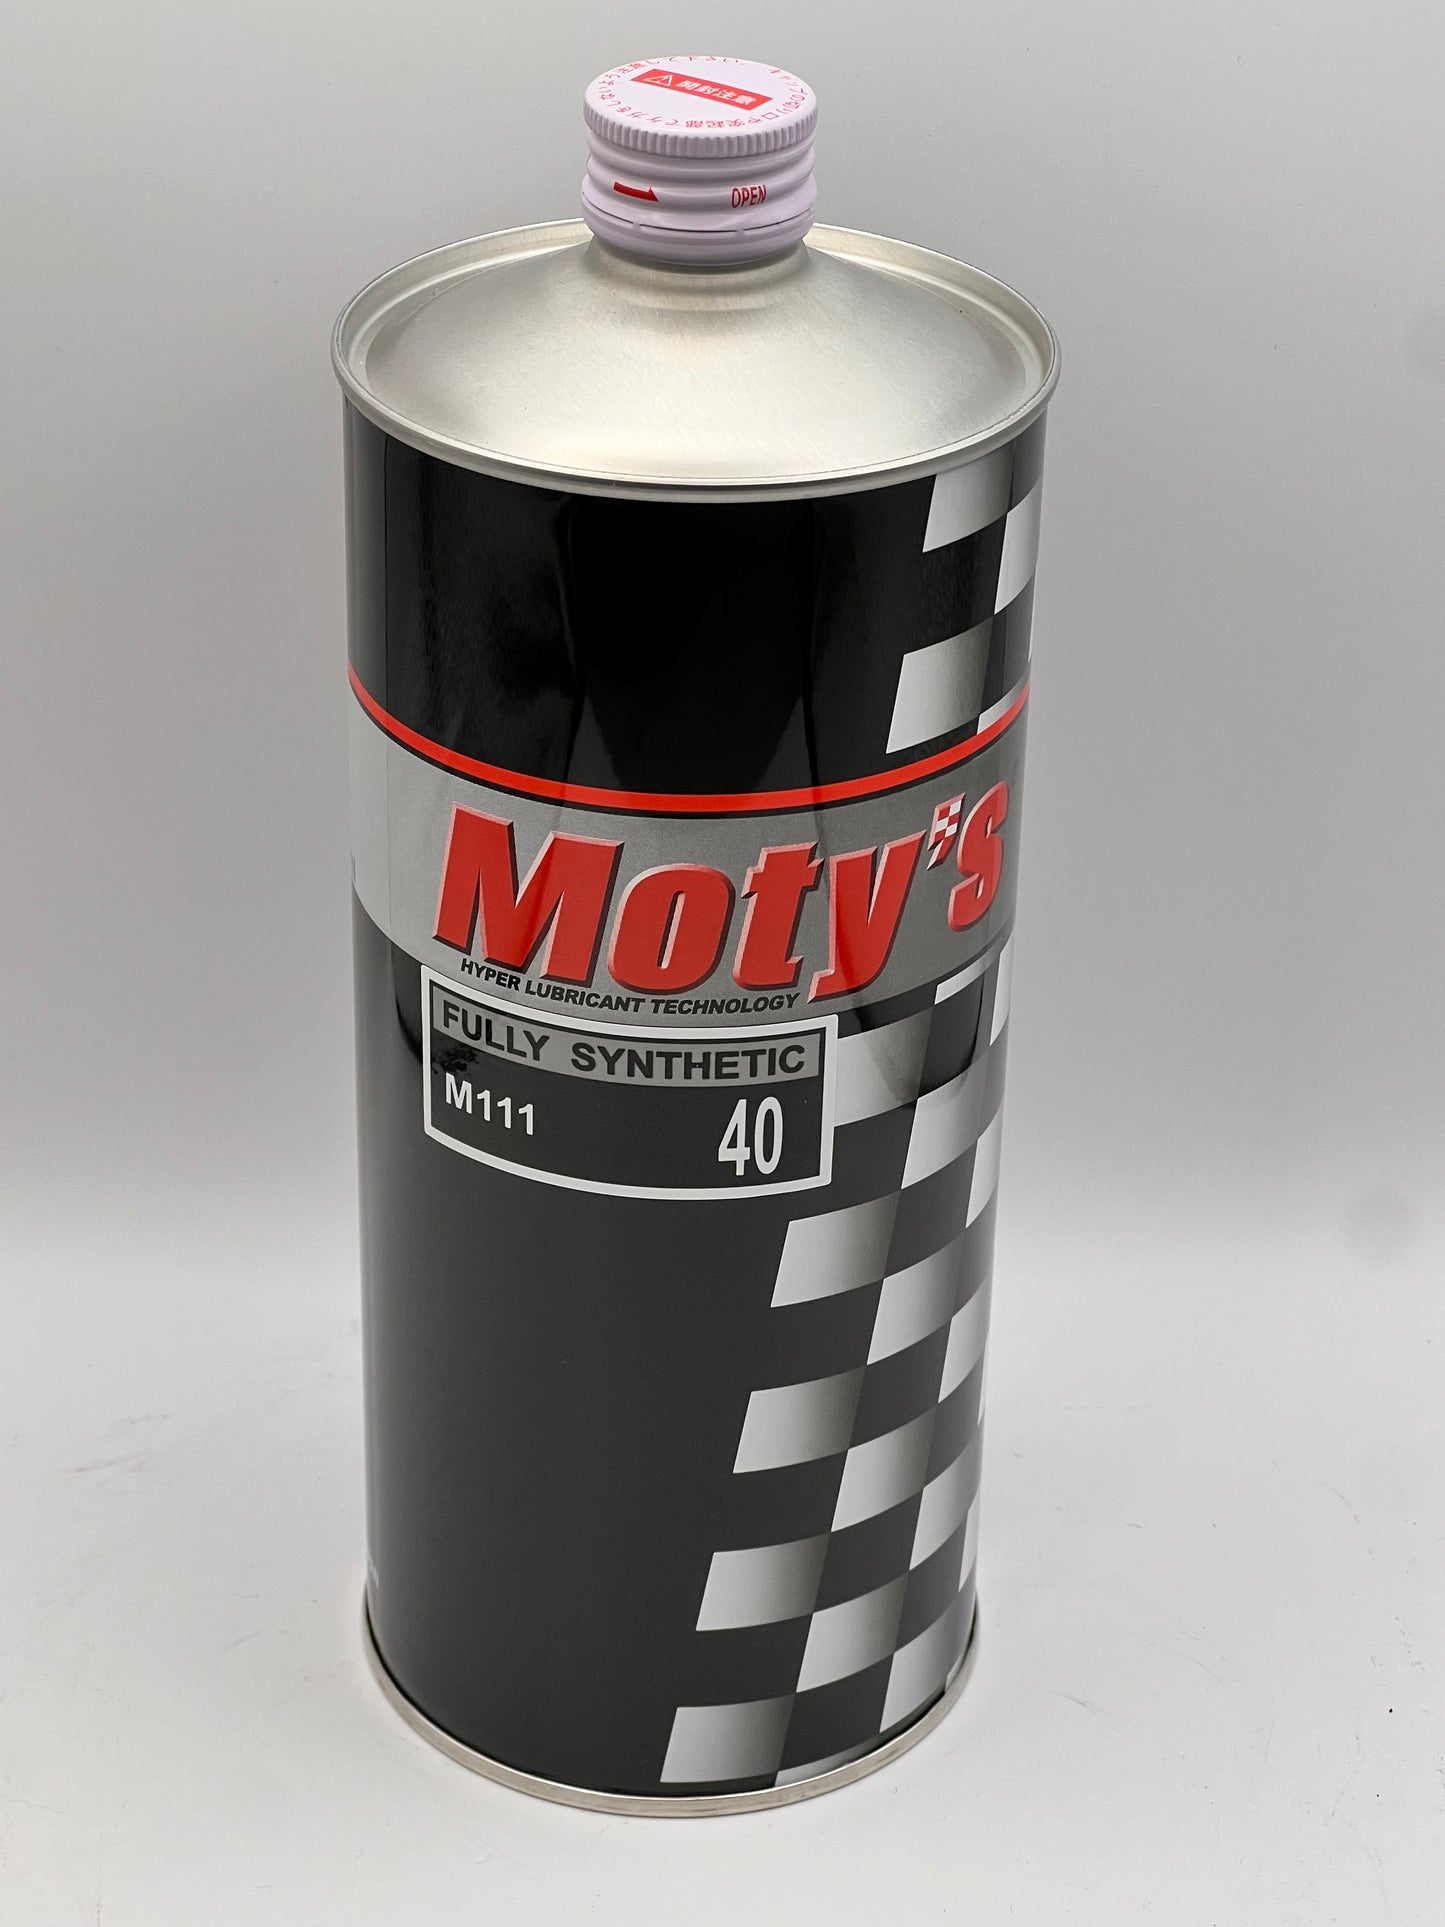 Moty's Racing Motor Oil Fully Synthetic M111(40) 5w40 1 Litre Can